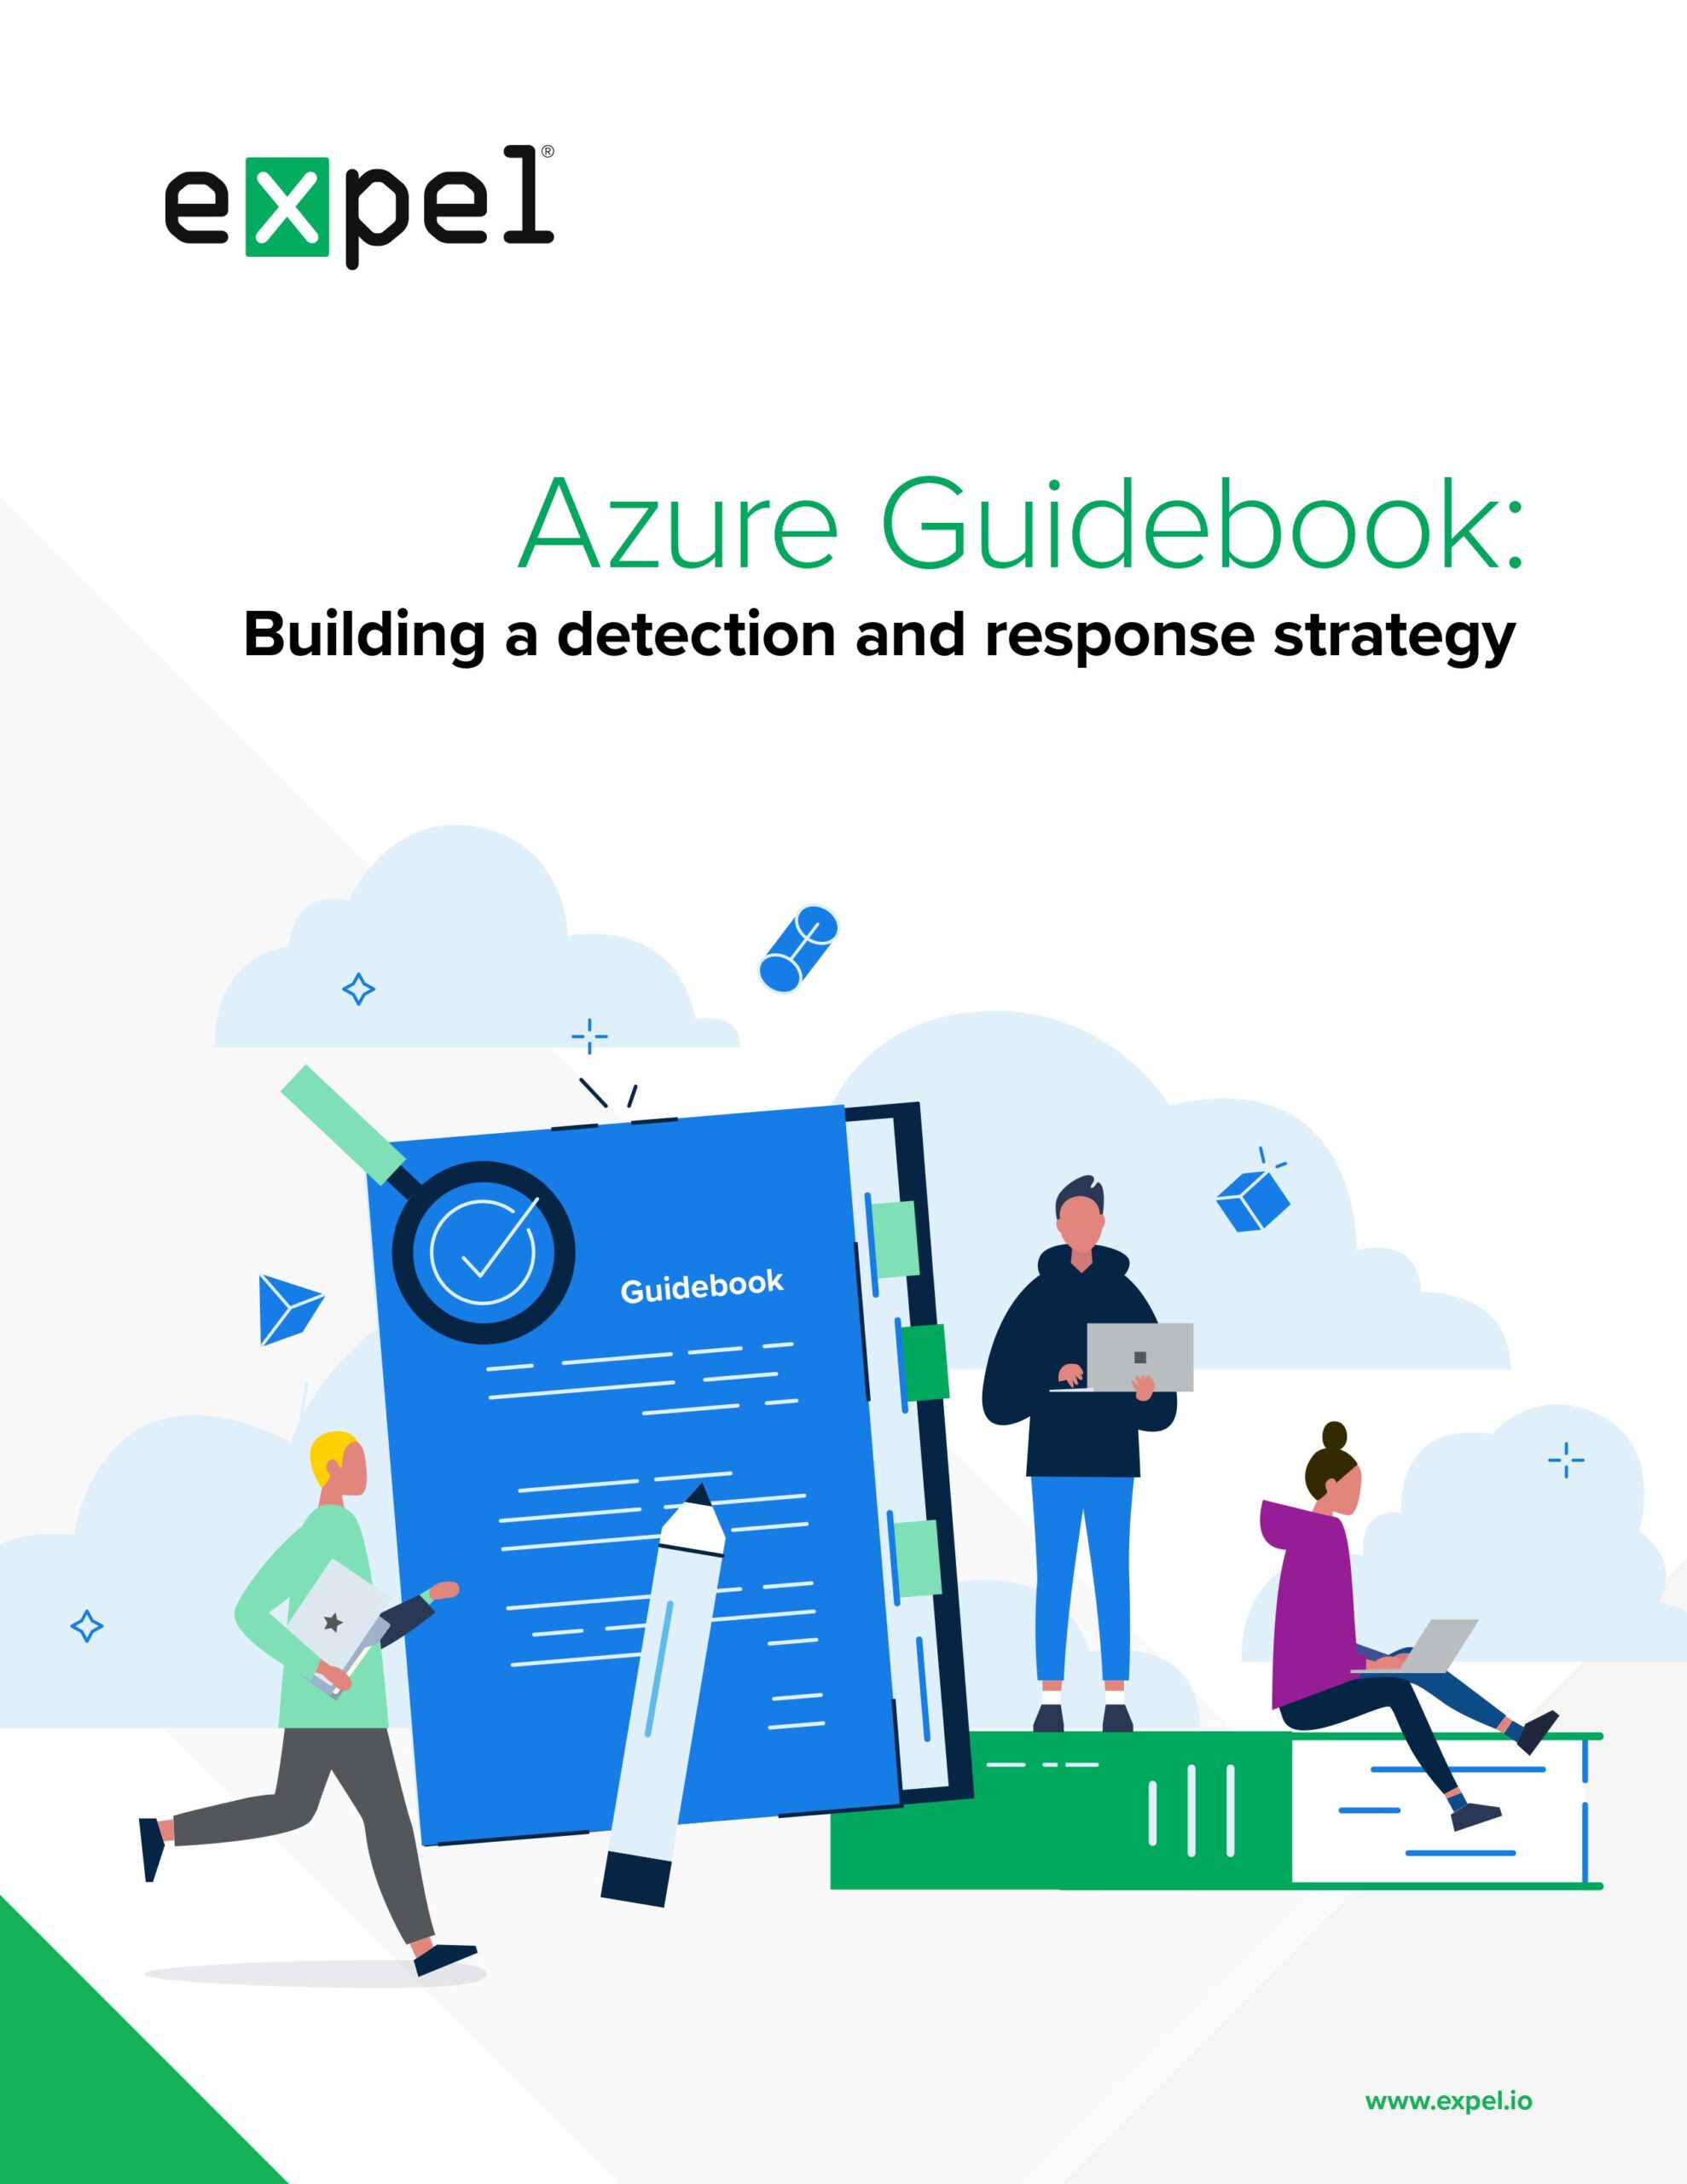 This guidebook will help you understand how to use Azure cloud security products to strengthen your security strategy.